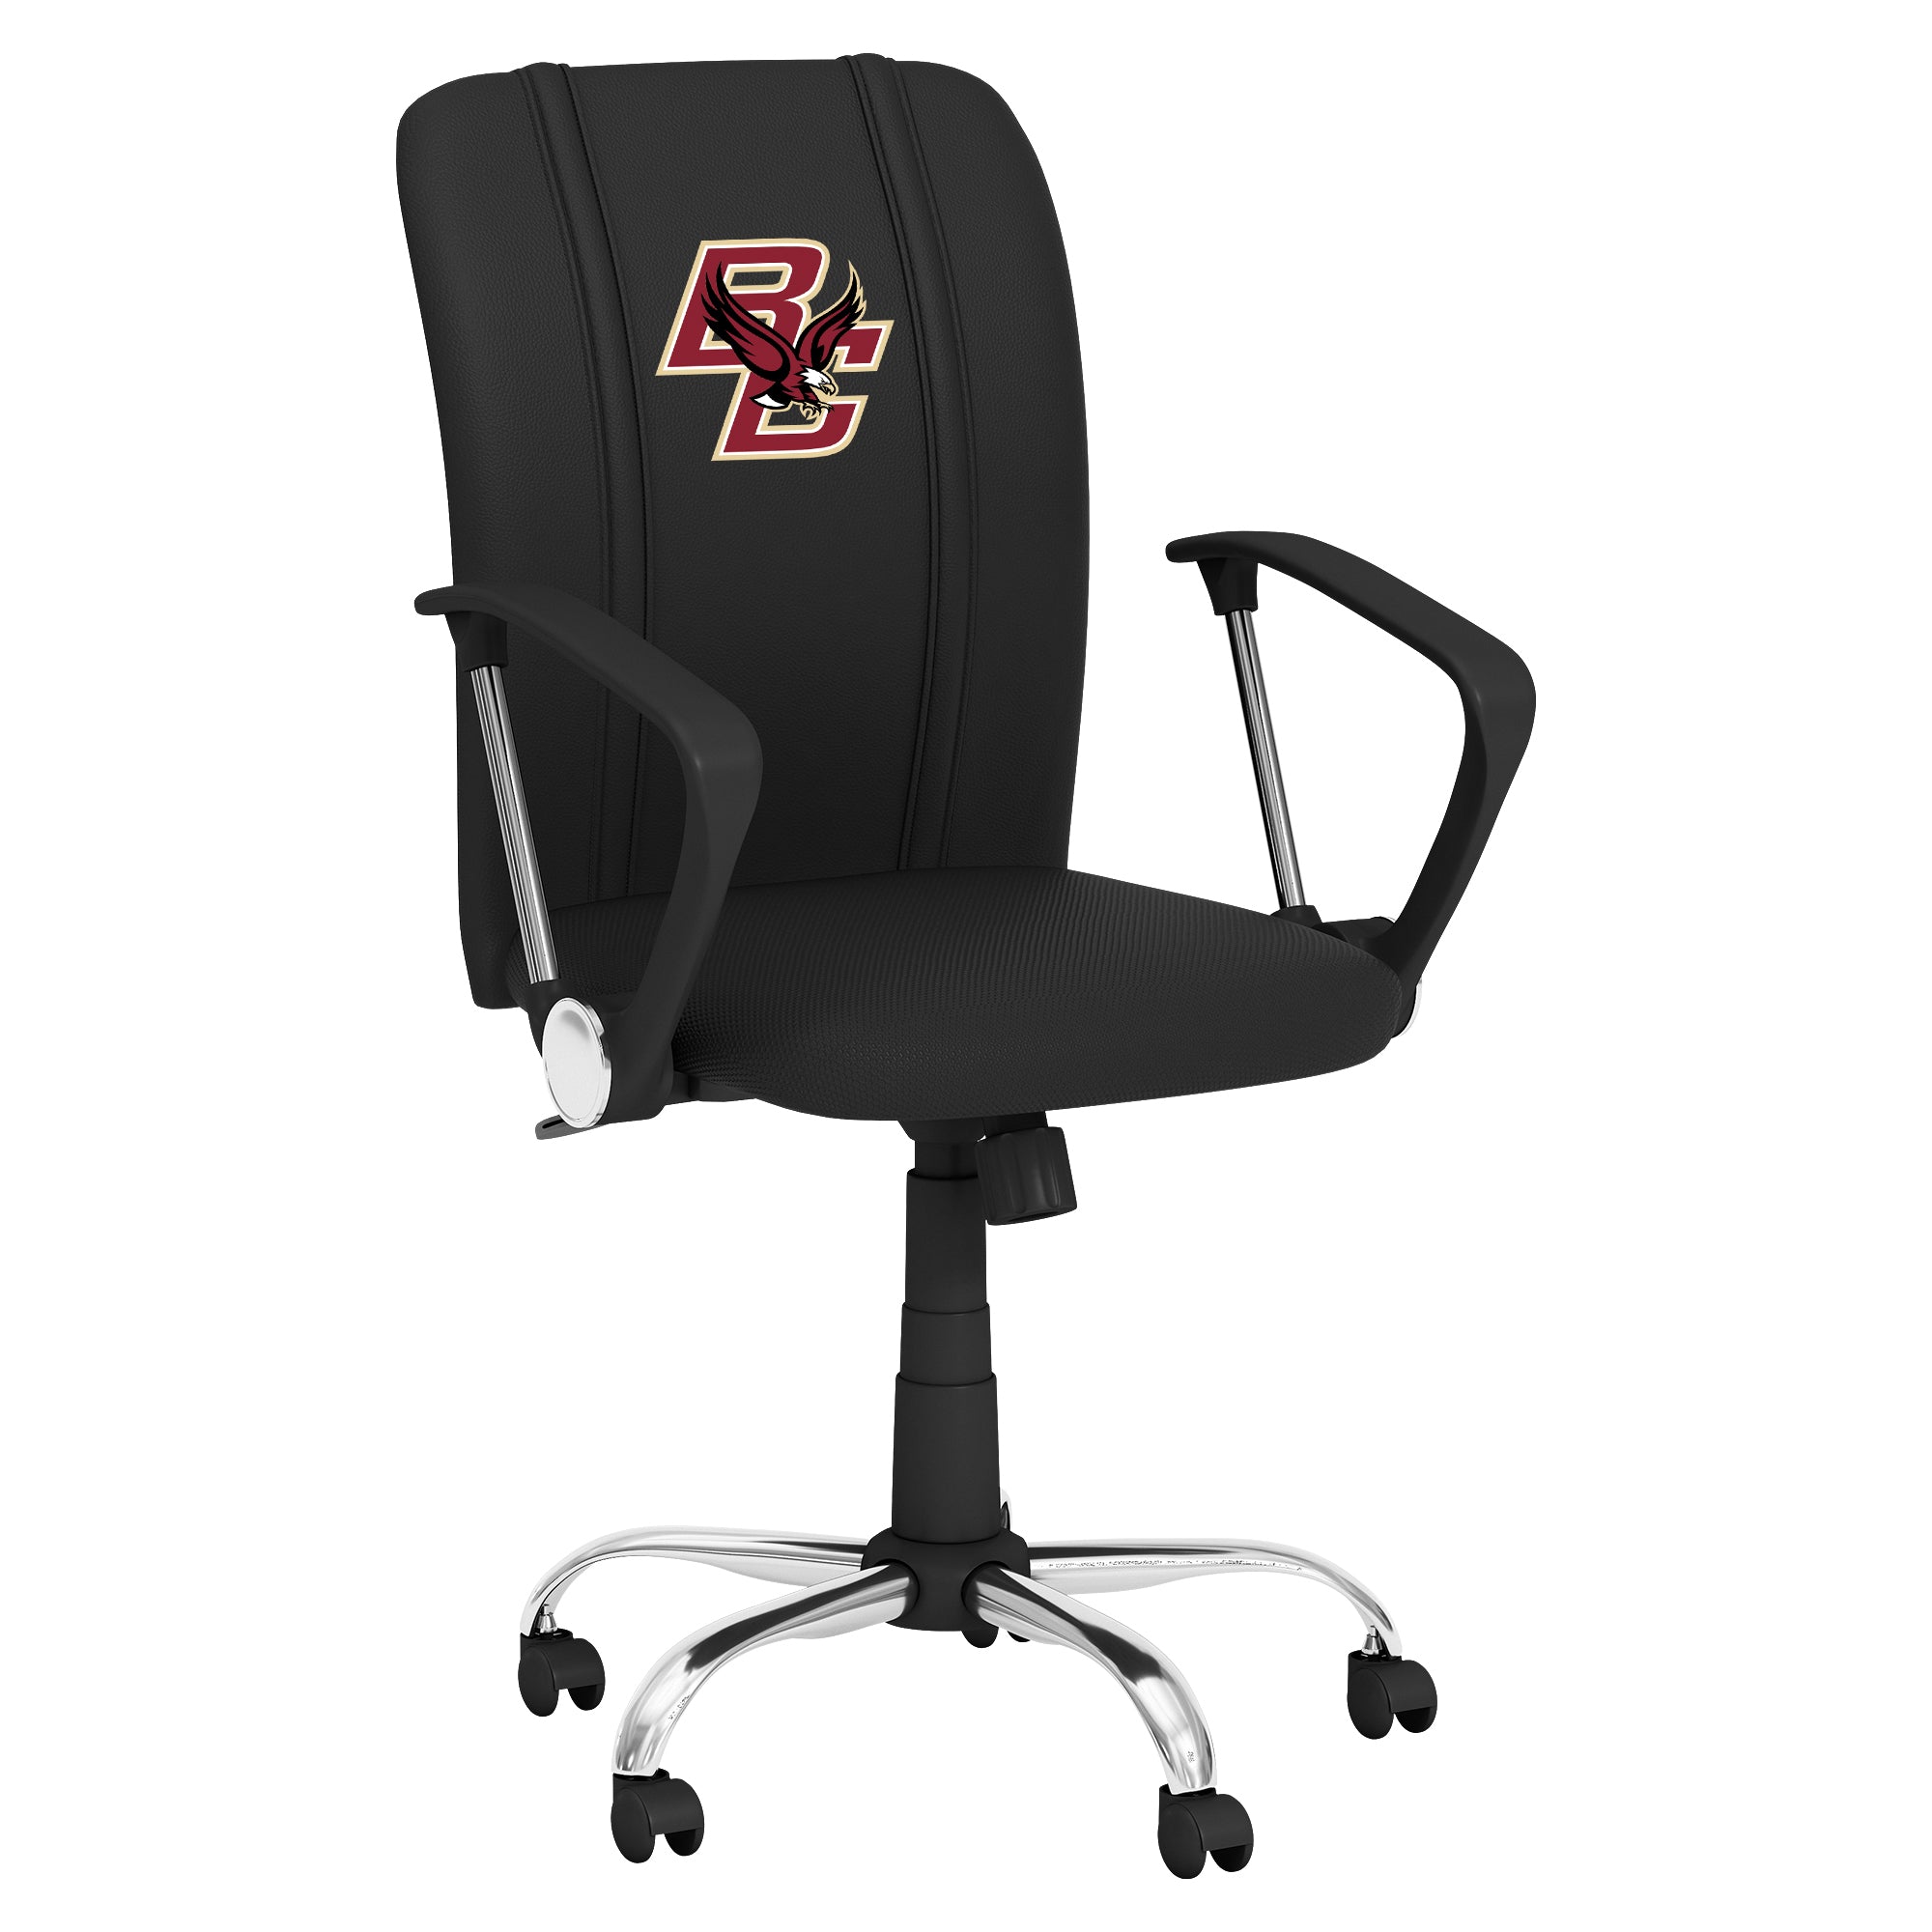 Boston College Eagles Curve Task Chair with Boston College Eagles Logo